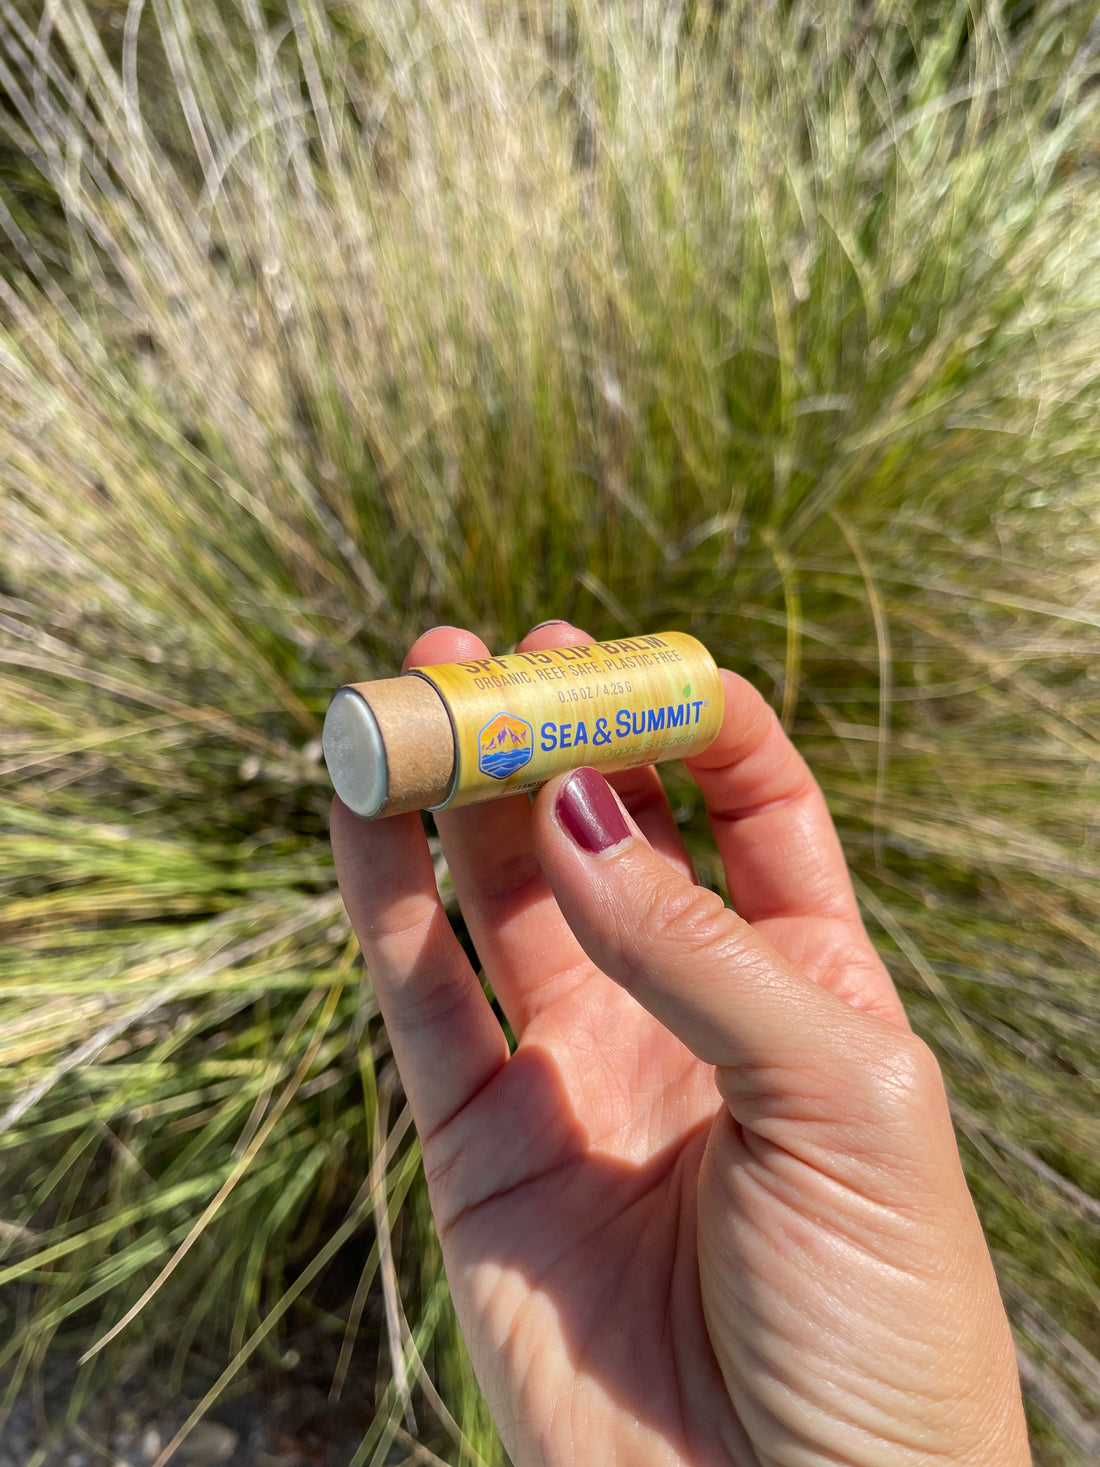 SFP 15 organic sunscreen lip balm held up outside in recyclable packaging.